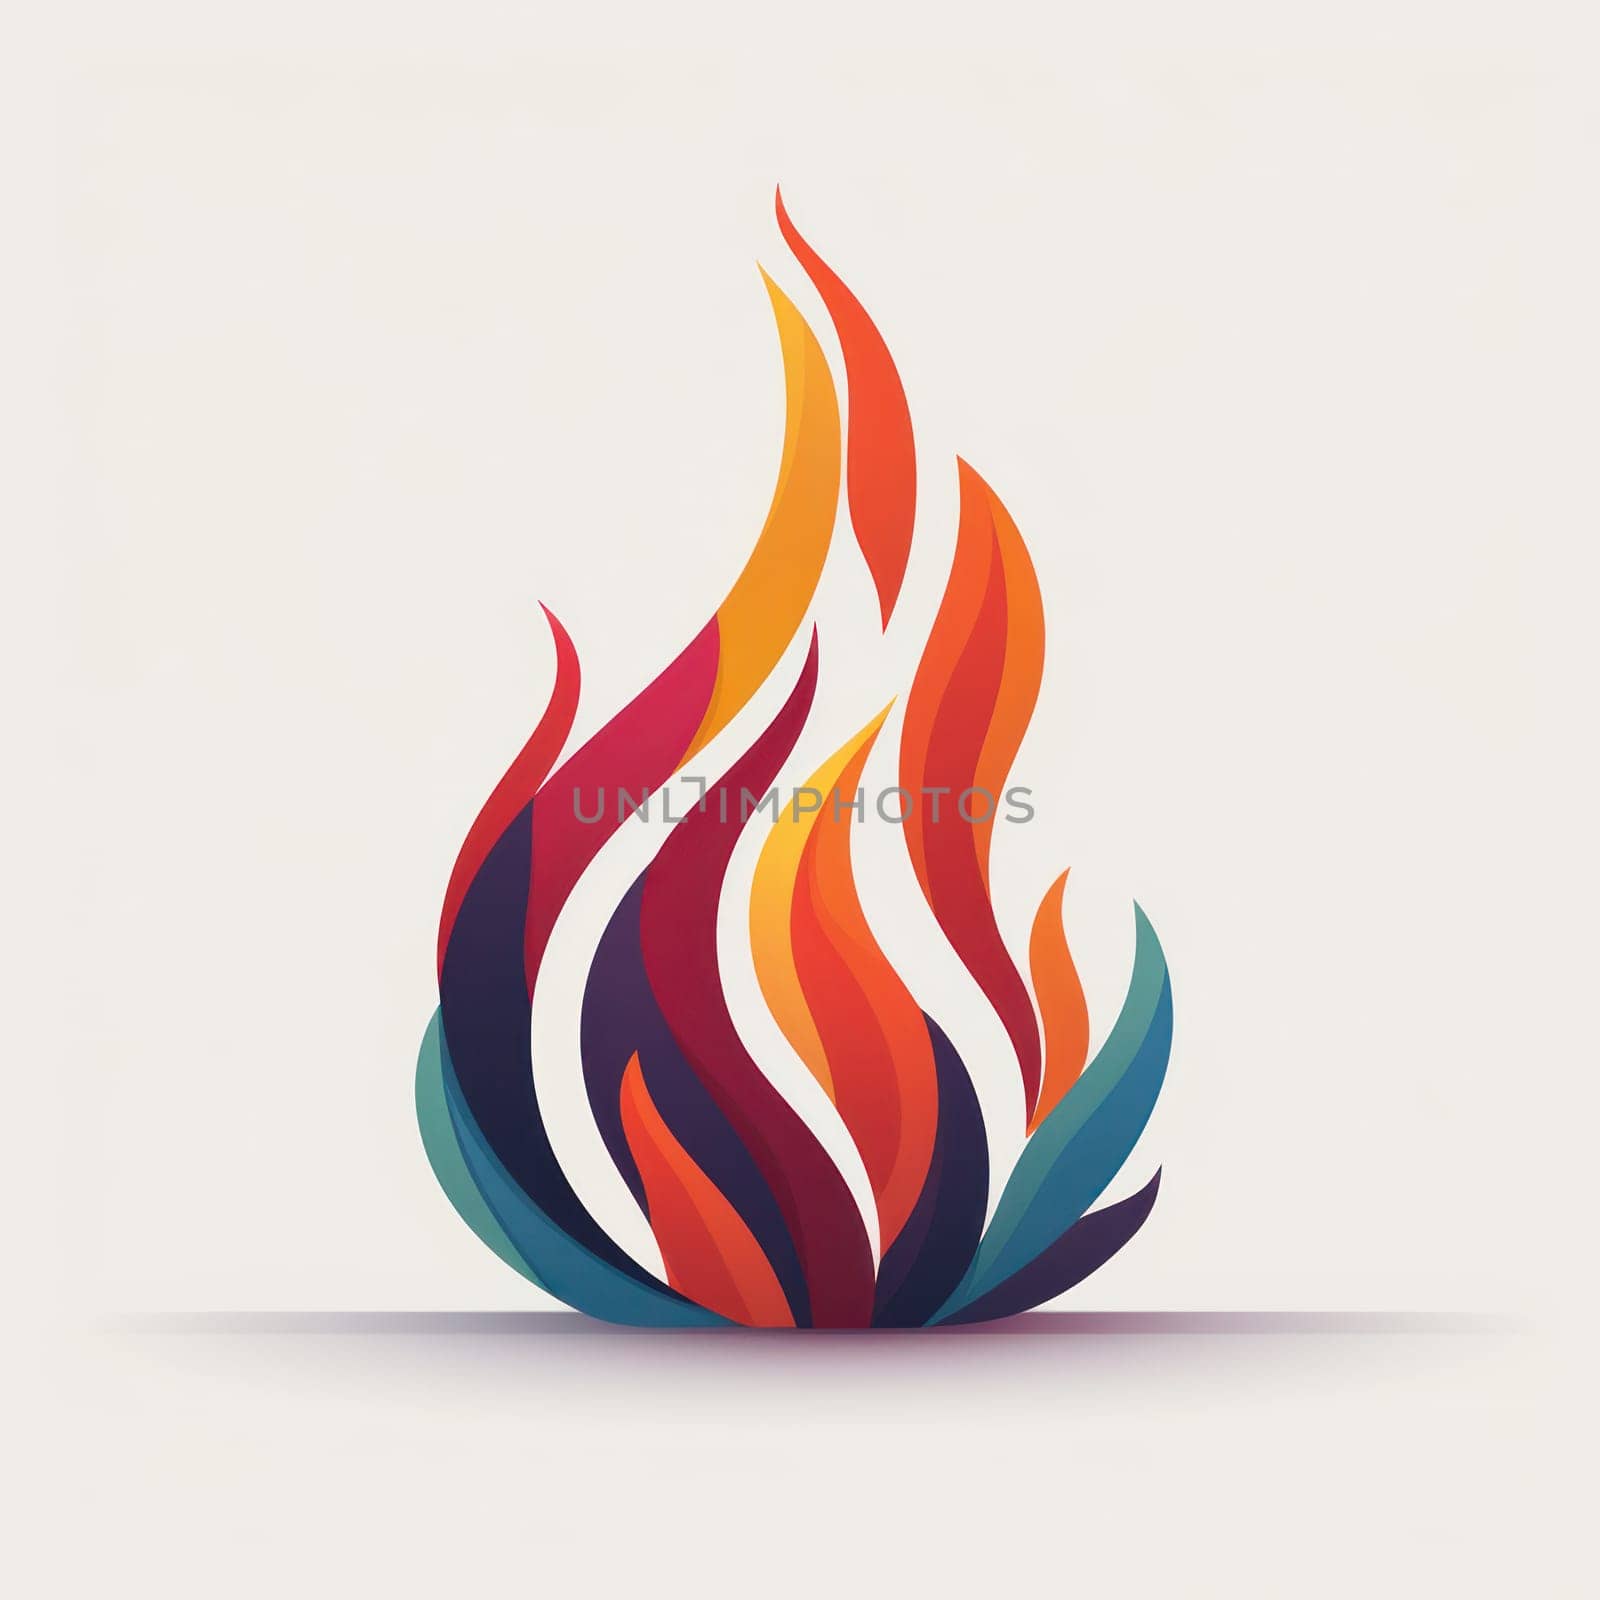 Flaming Fire: A Fiery Illustration of the Burning Campfire Emblem by Vichizh